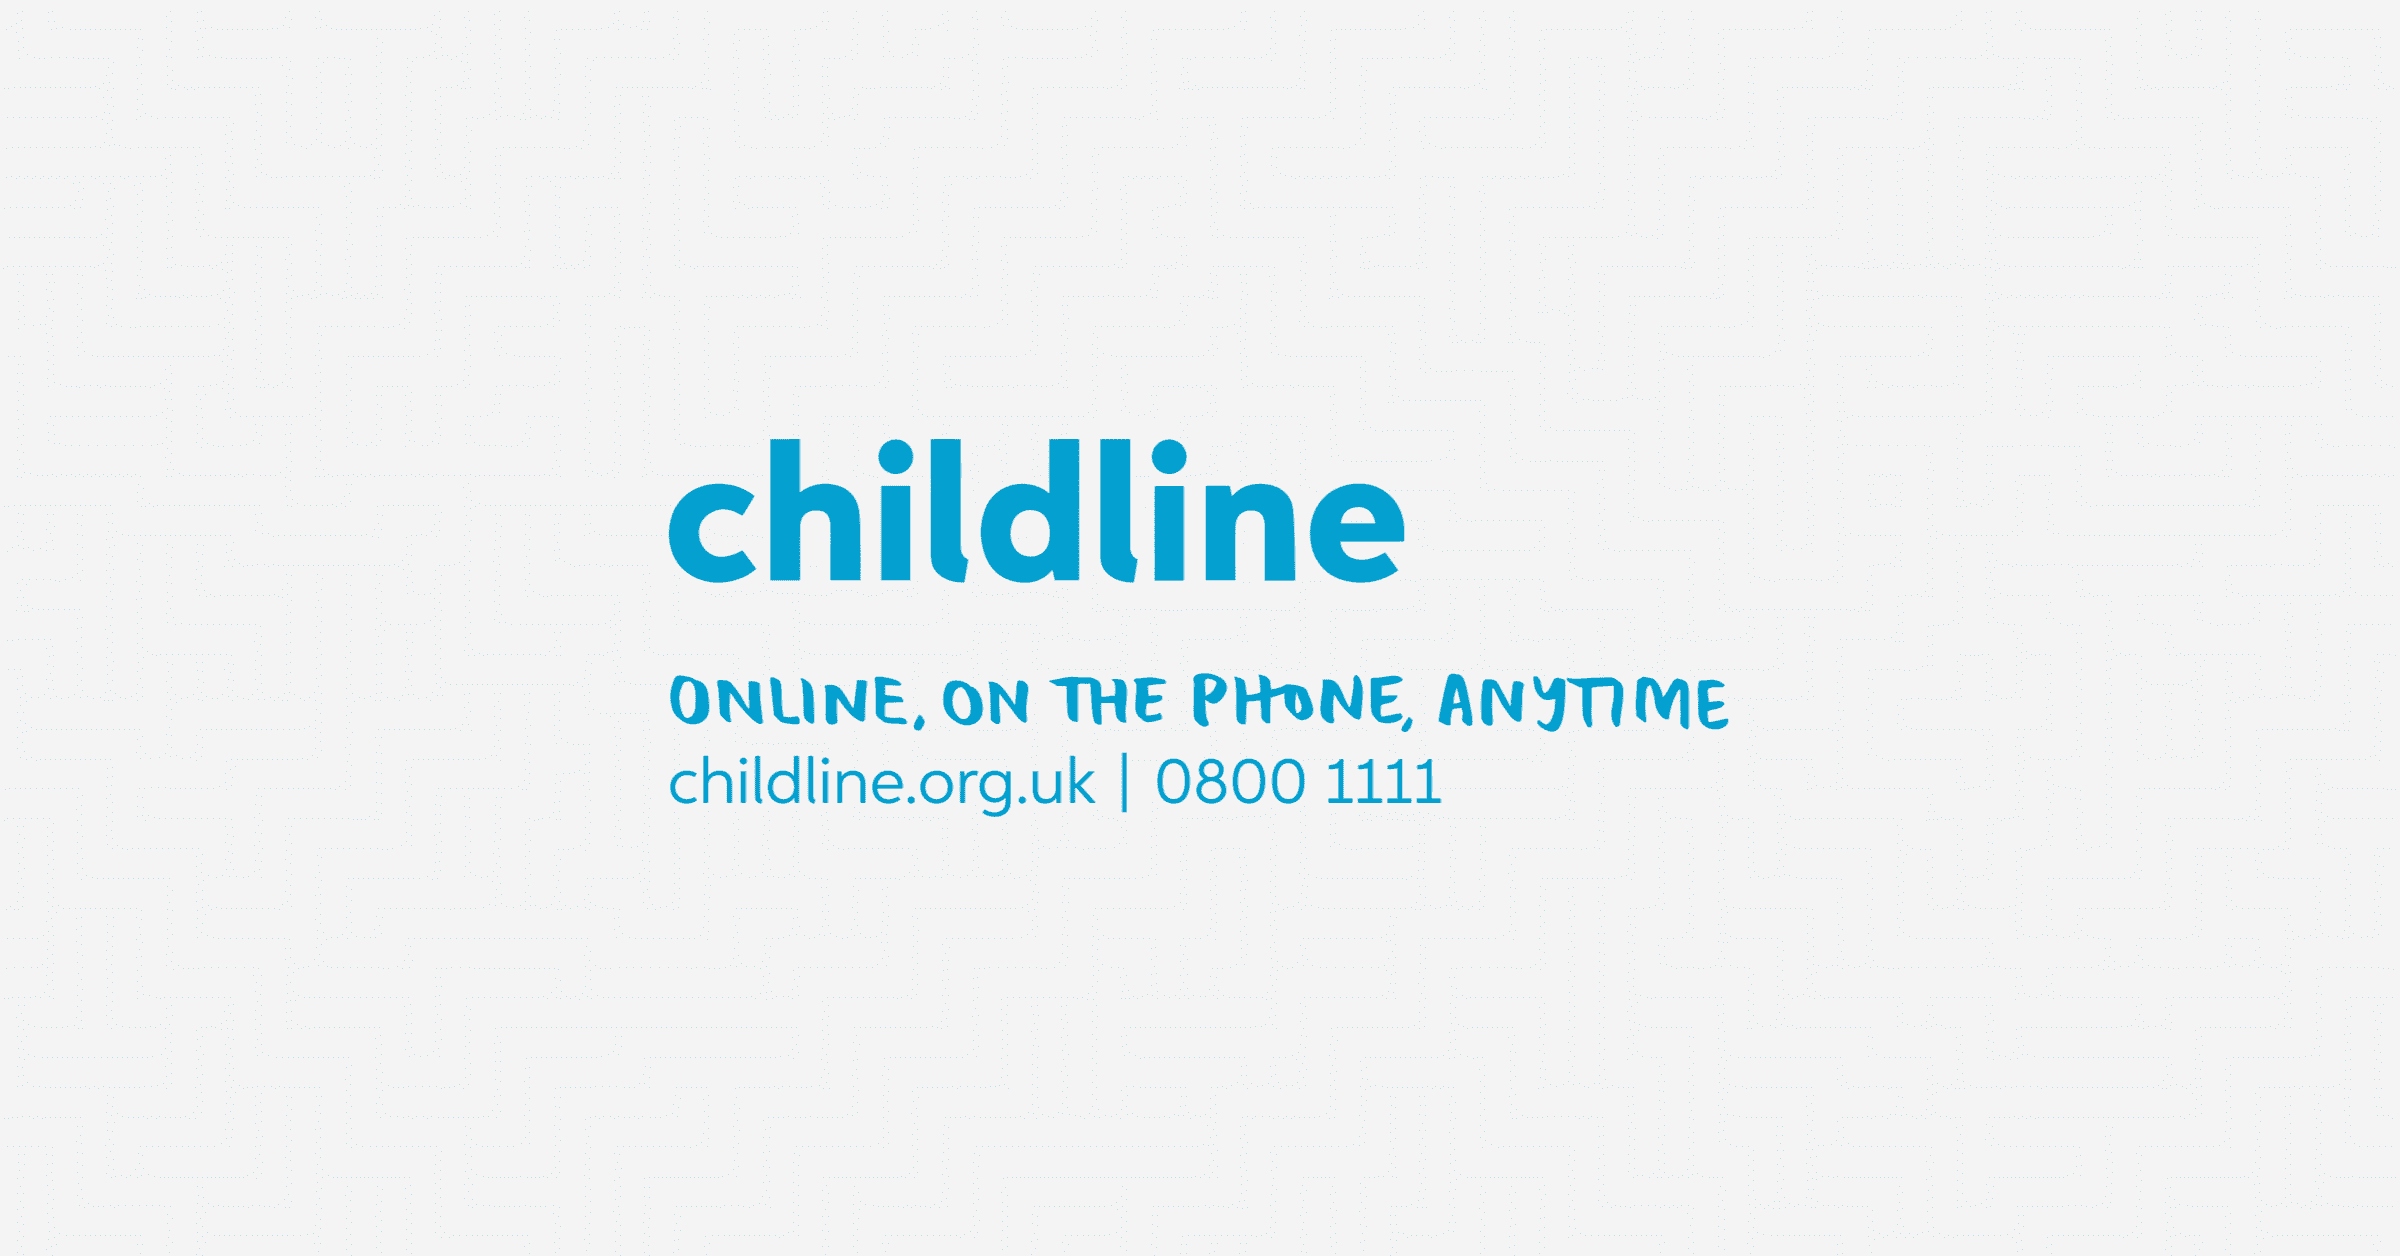 Yoti partners with Childline, get in touch with them at childline.org.uk or 0800 1111